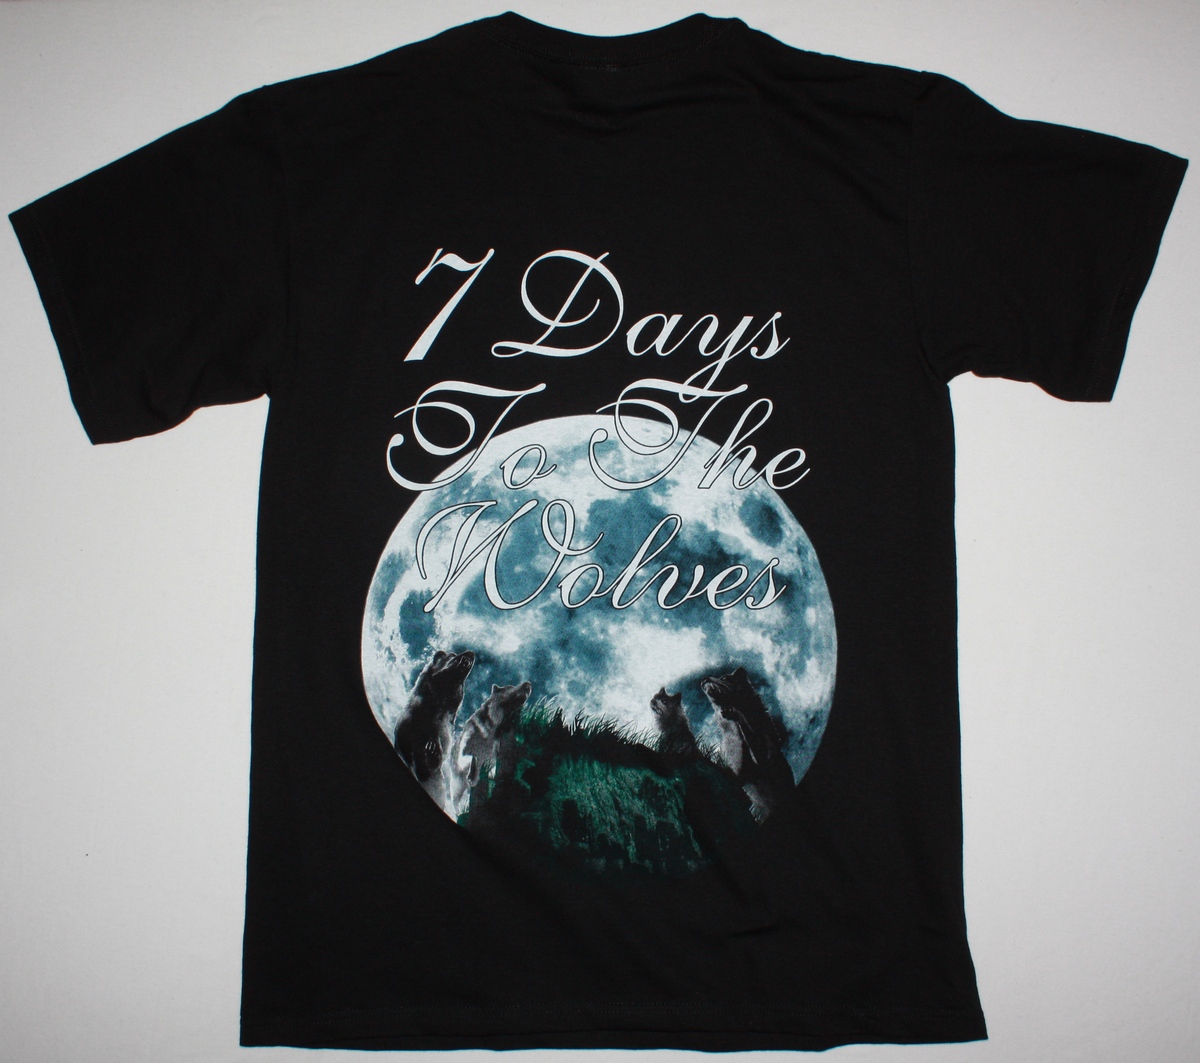 NIGHTWISH SEVEN DAYS TO THE WOLVES NEW BLACK T-SHIRT